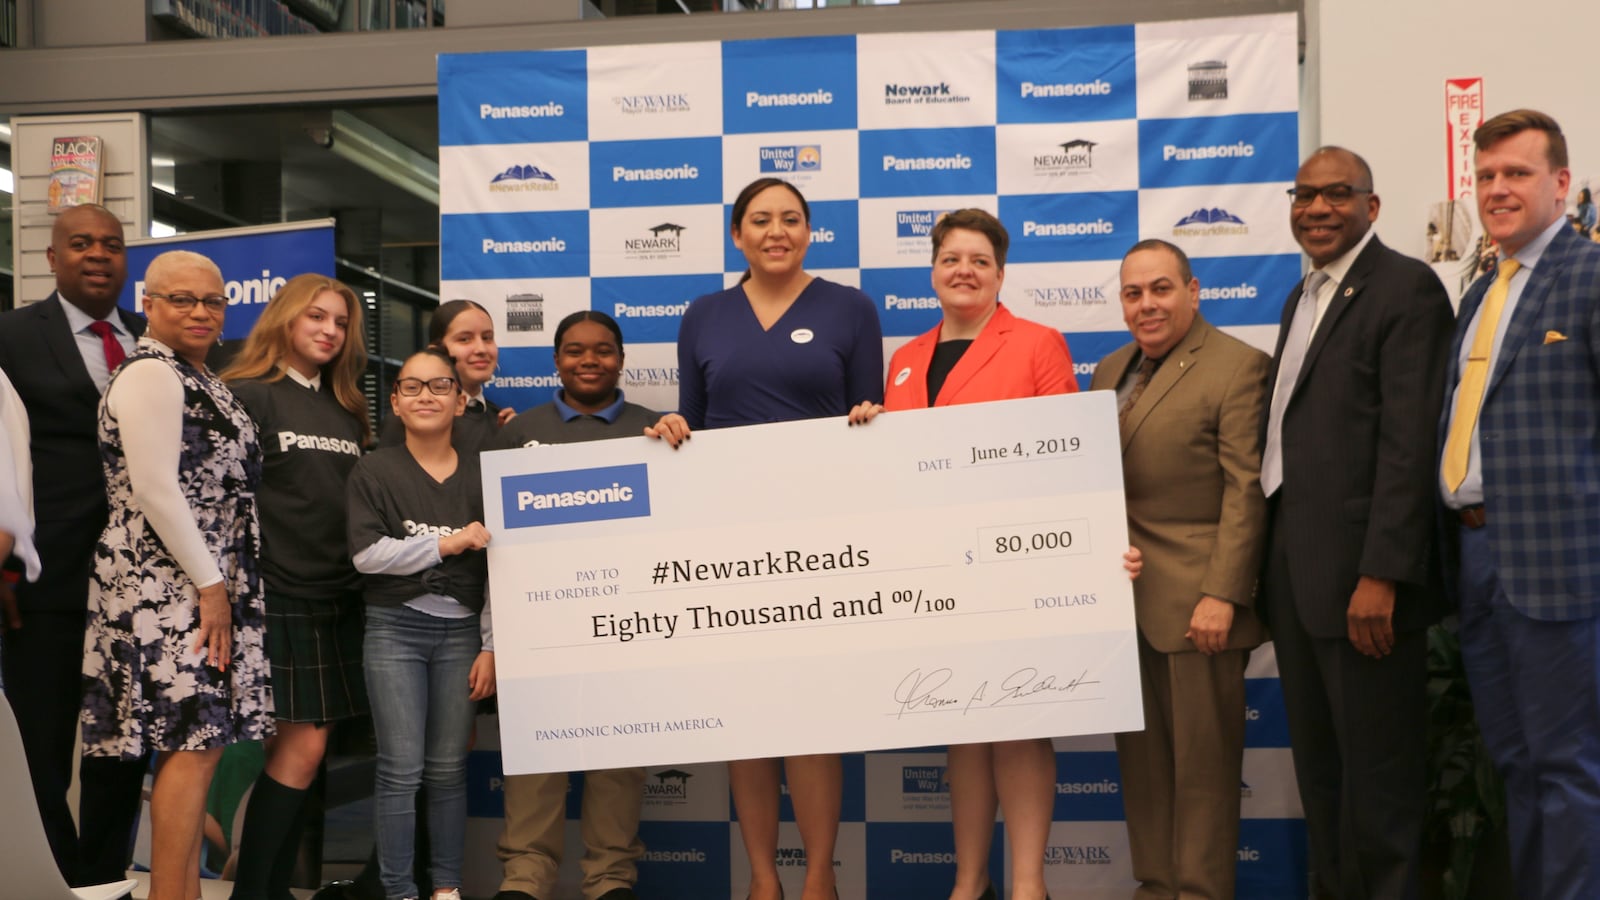 Partner groups, including the Panasonic Foundation, have contributed a total of $100,000 to the city's #NewarkReads effort.